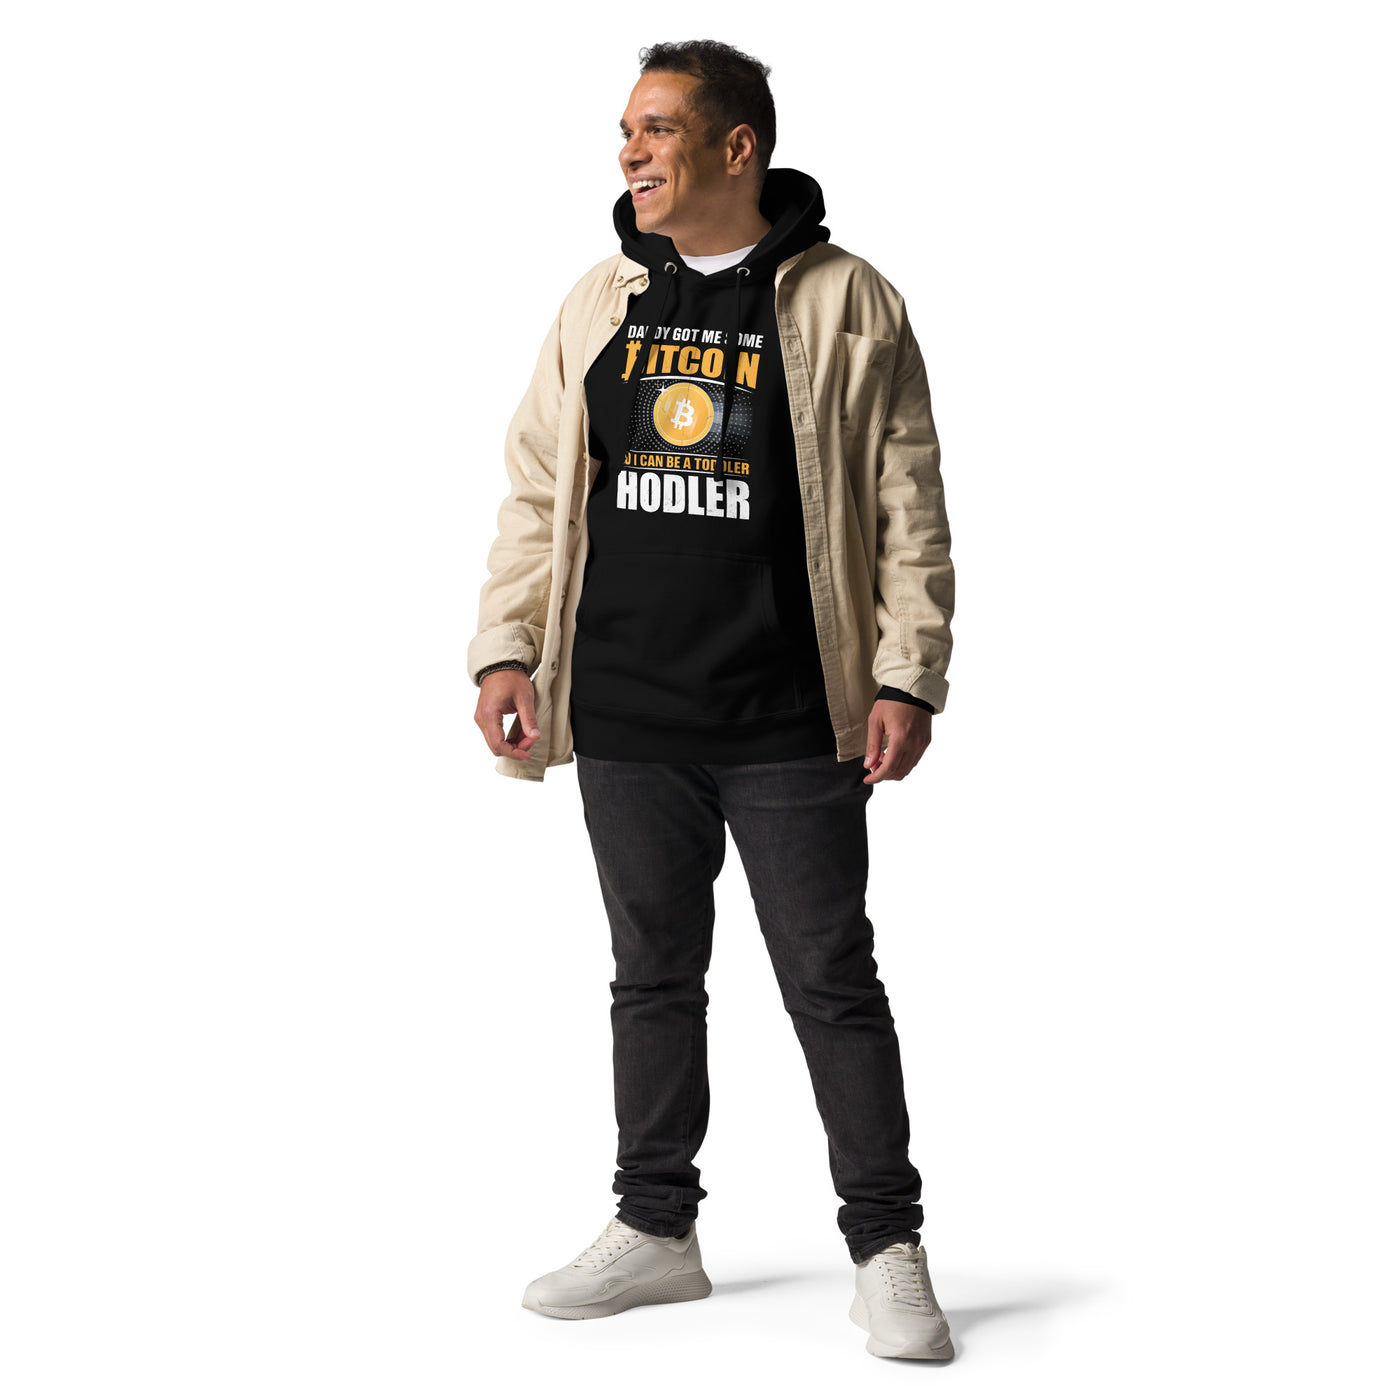 Daddy got me some Bitcoin, so I can be toddler holder - Unisex Hoodie